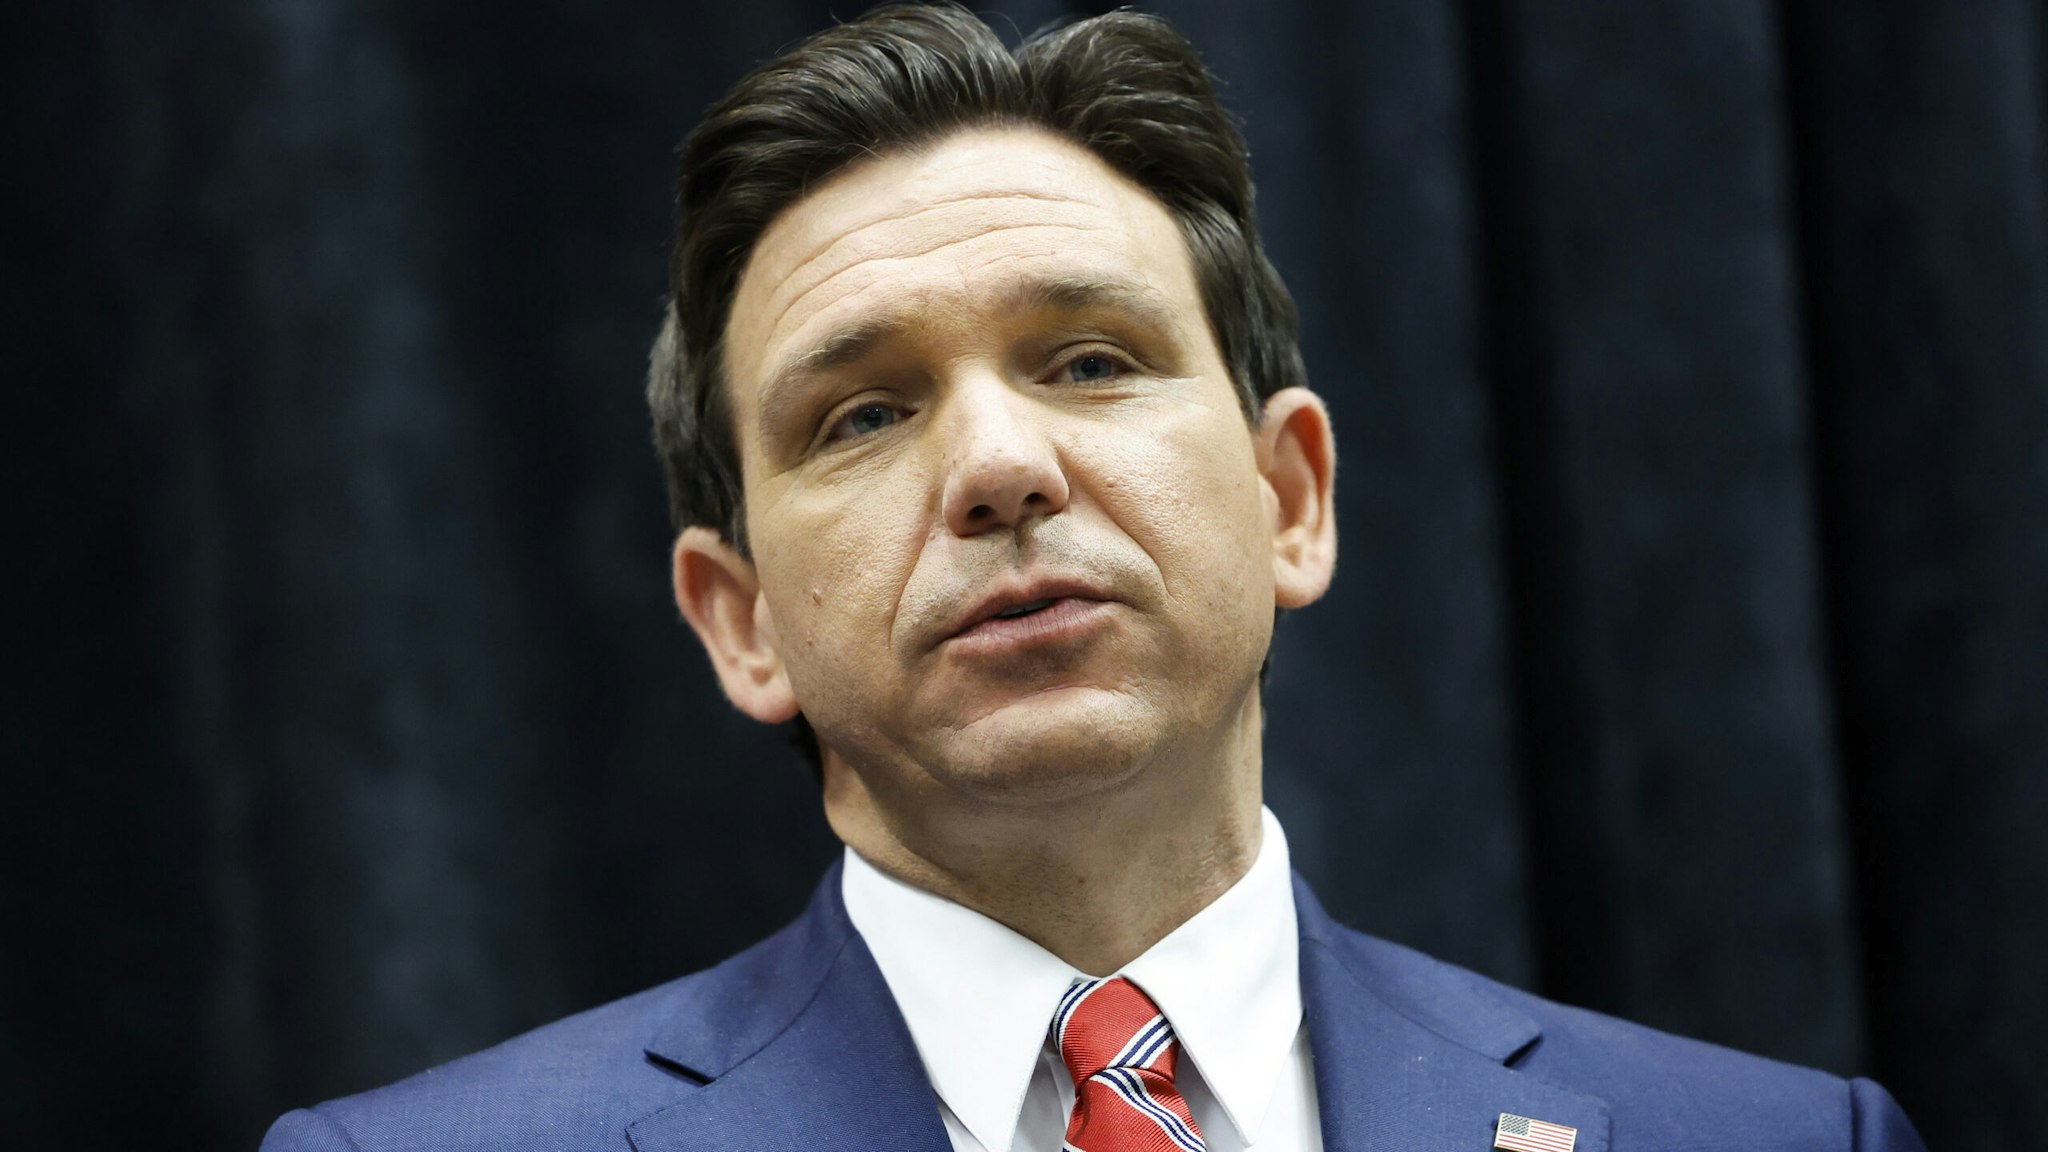 DES MOINES, IOWA - JANUARY 09: Republican presidential candidate Florida Governor Ron DeSantis speaks with reporters at a media center in a Sheraton Hotel on January 09, 2024 in Des Moines, Iowa. DeSantis spoke to reporters after participating in a Fox News Town Hall.